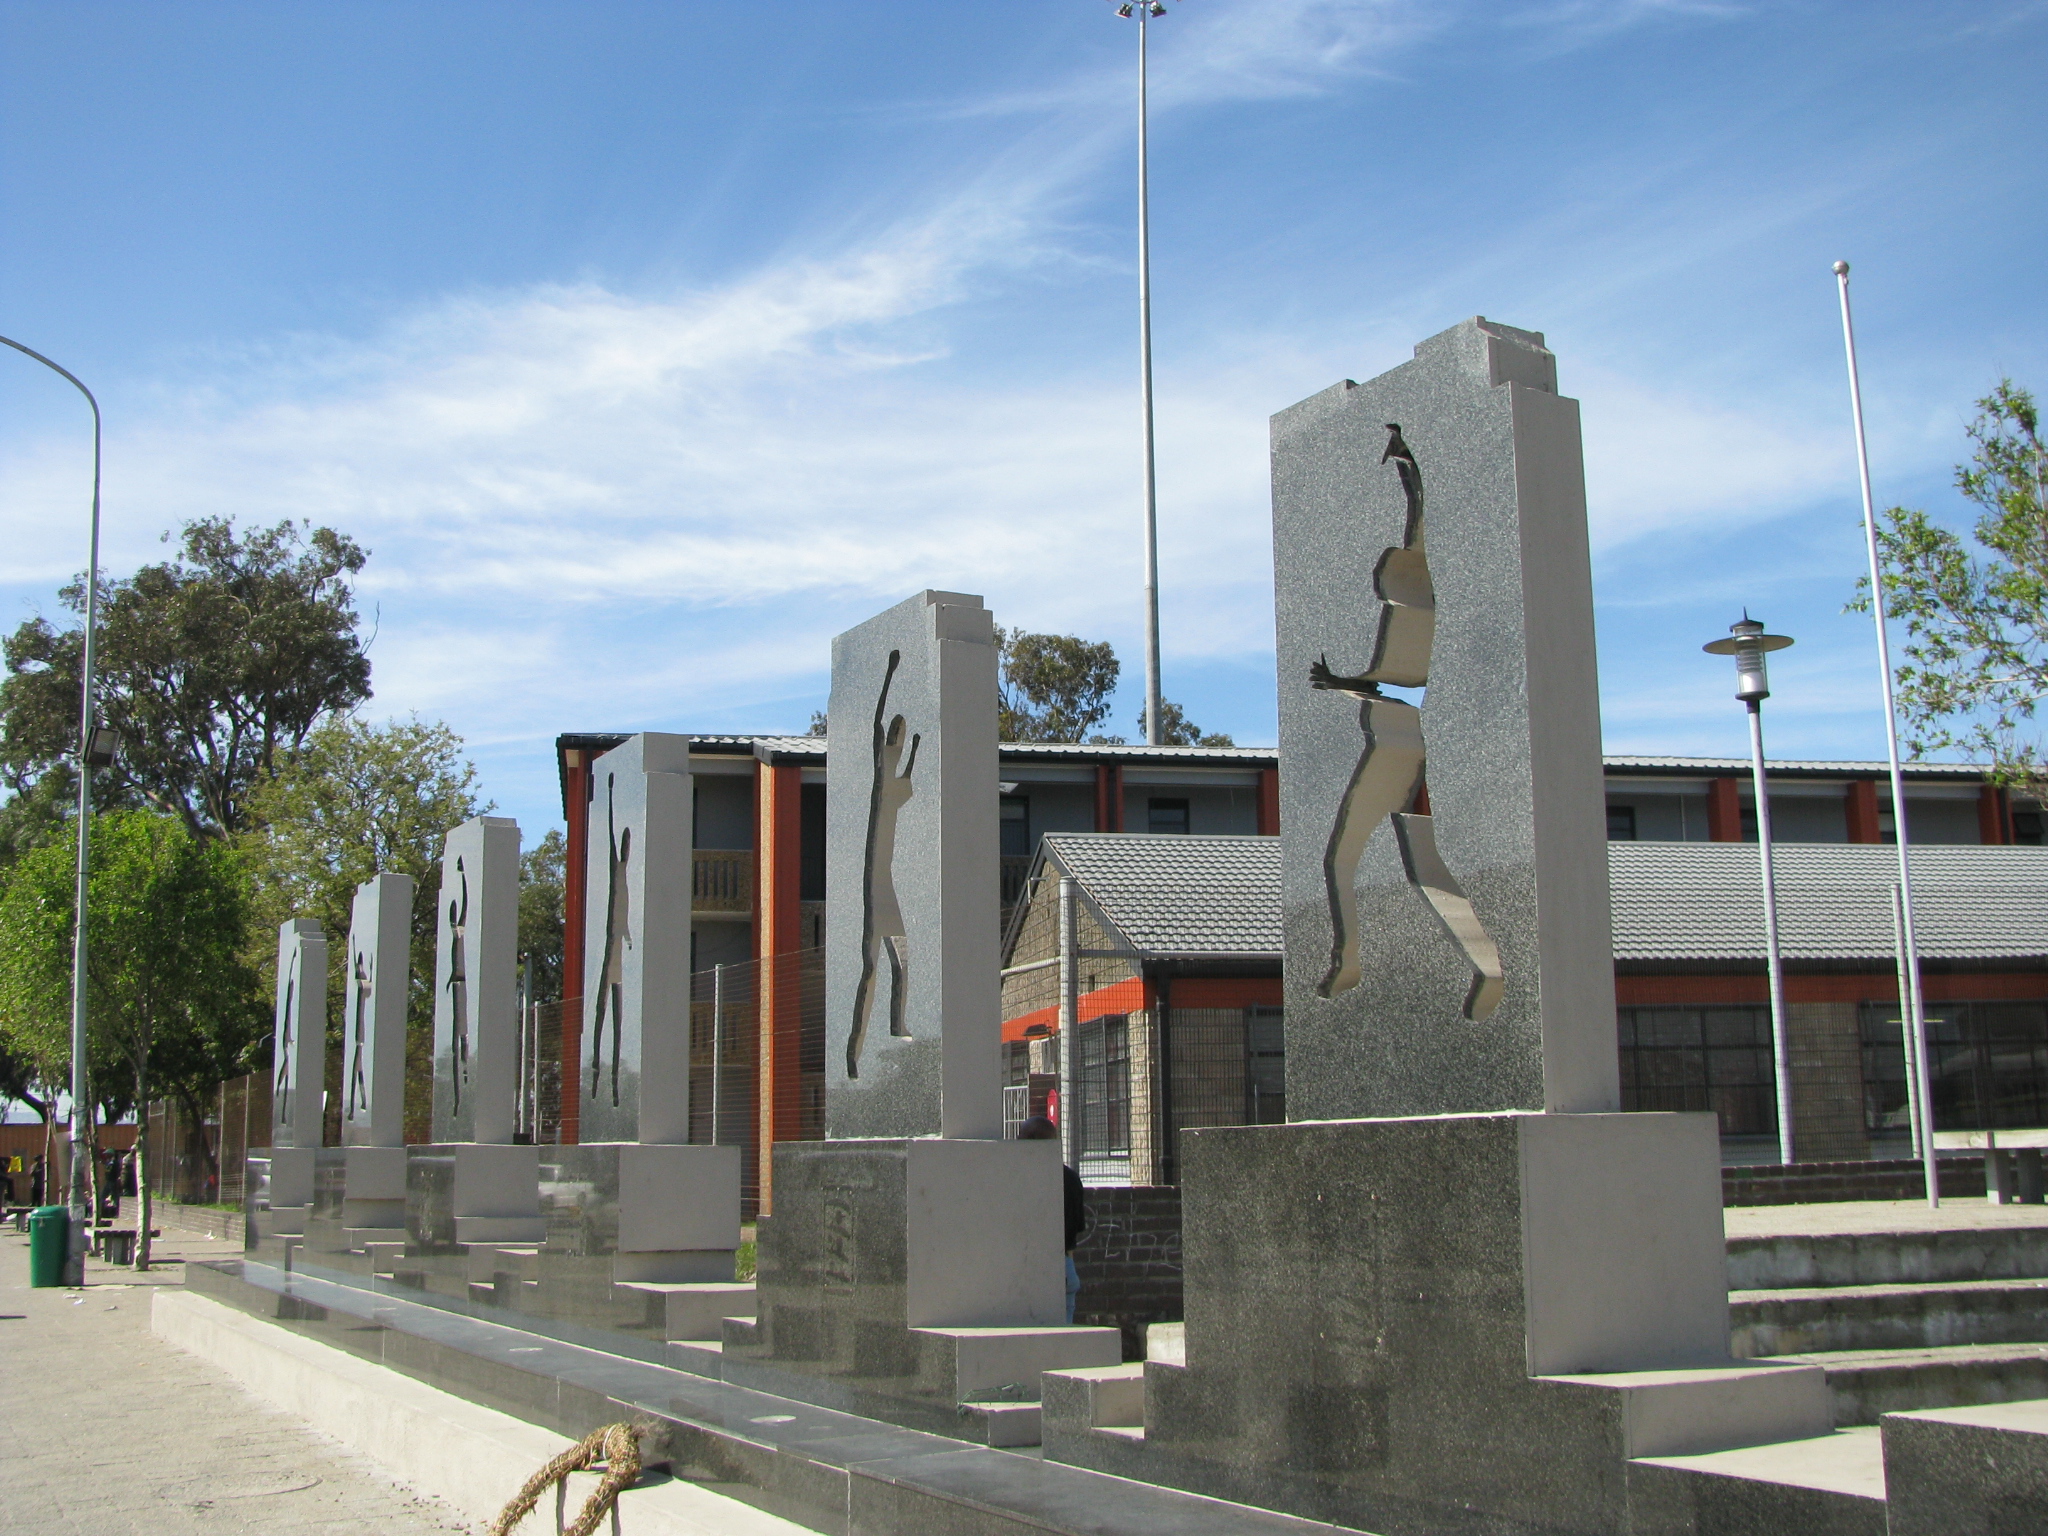 A monument to the Gugulethu Seven, killed by apartheid police